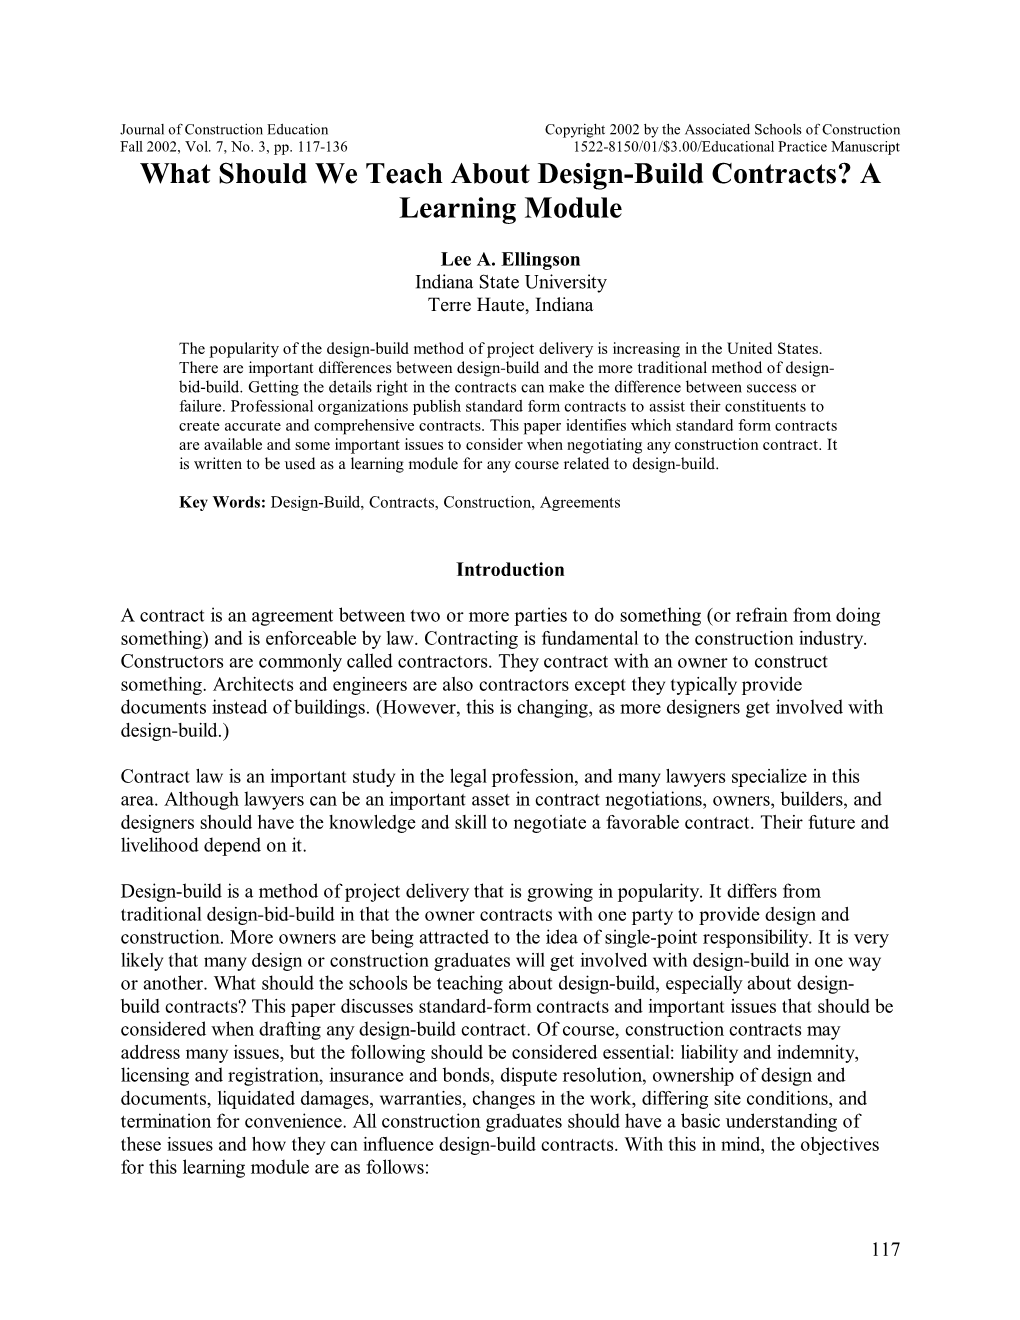 Fall 2002, Vol. 7, No. 3, Pp. 117-136 1522-8150/01/$3.00/Educational Practice Manuscript What Should We Teach About Design-Build Contracts? a Learning Module